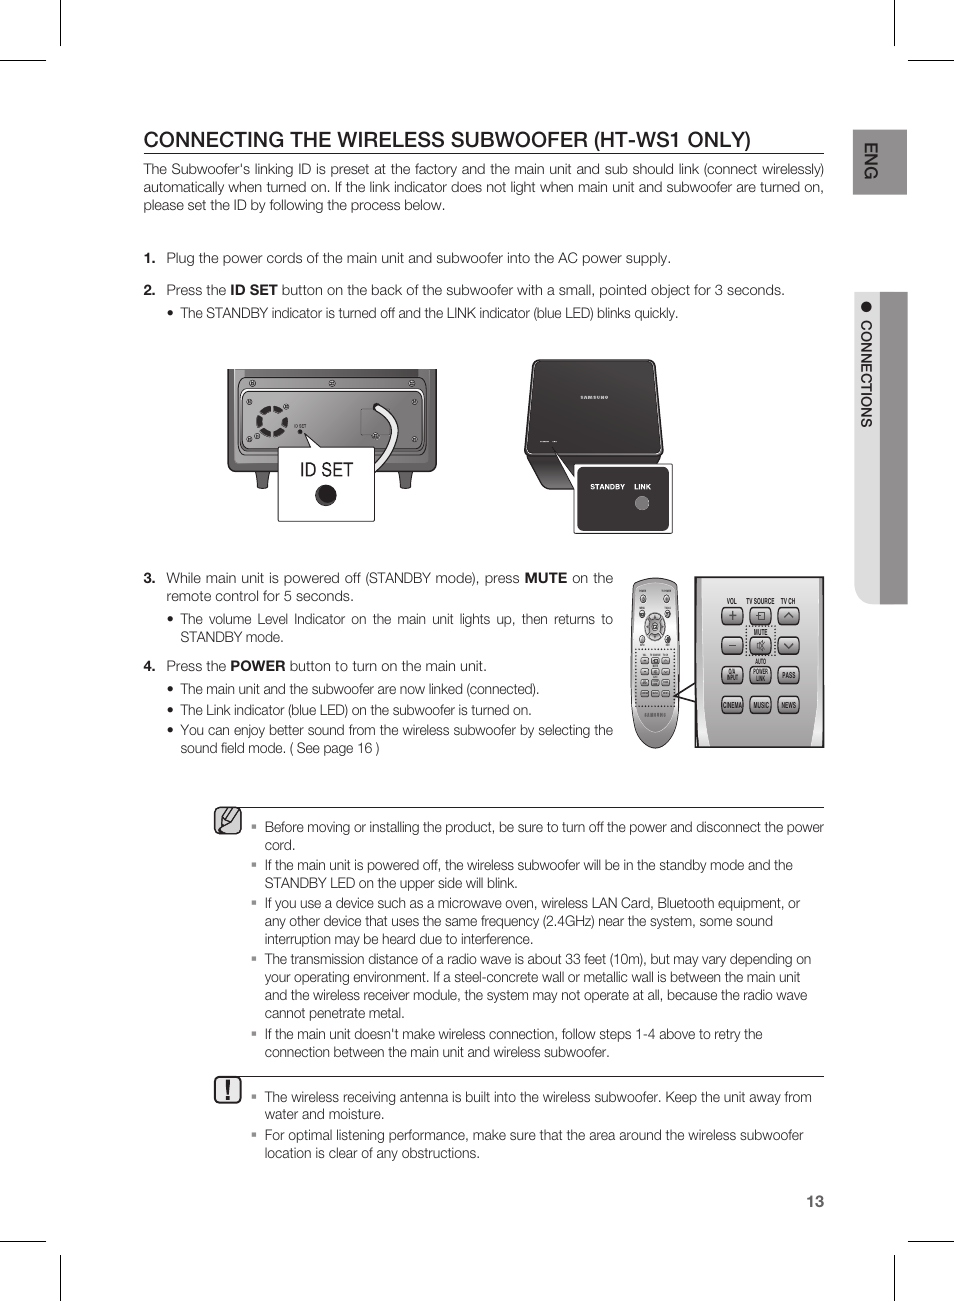 Connecting the wireless (ht-ws1 only) | Samsung HT-WS1R User Manual | Page 13 / 21 | Original